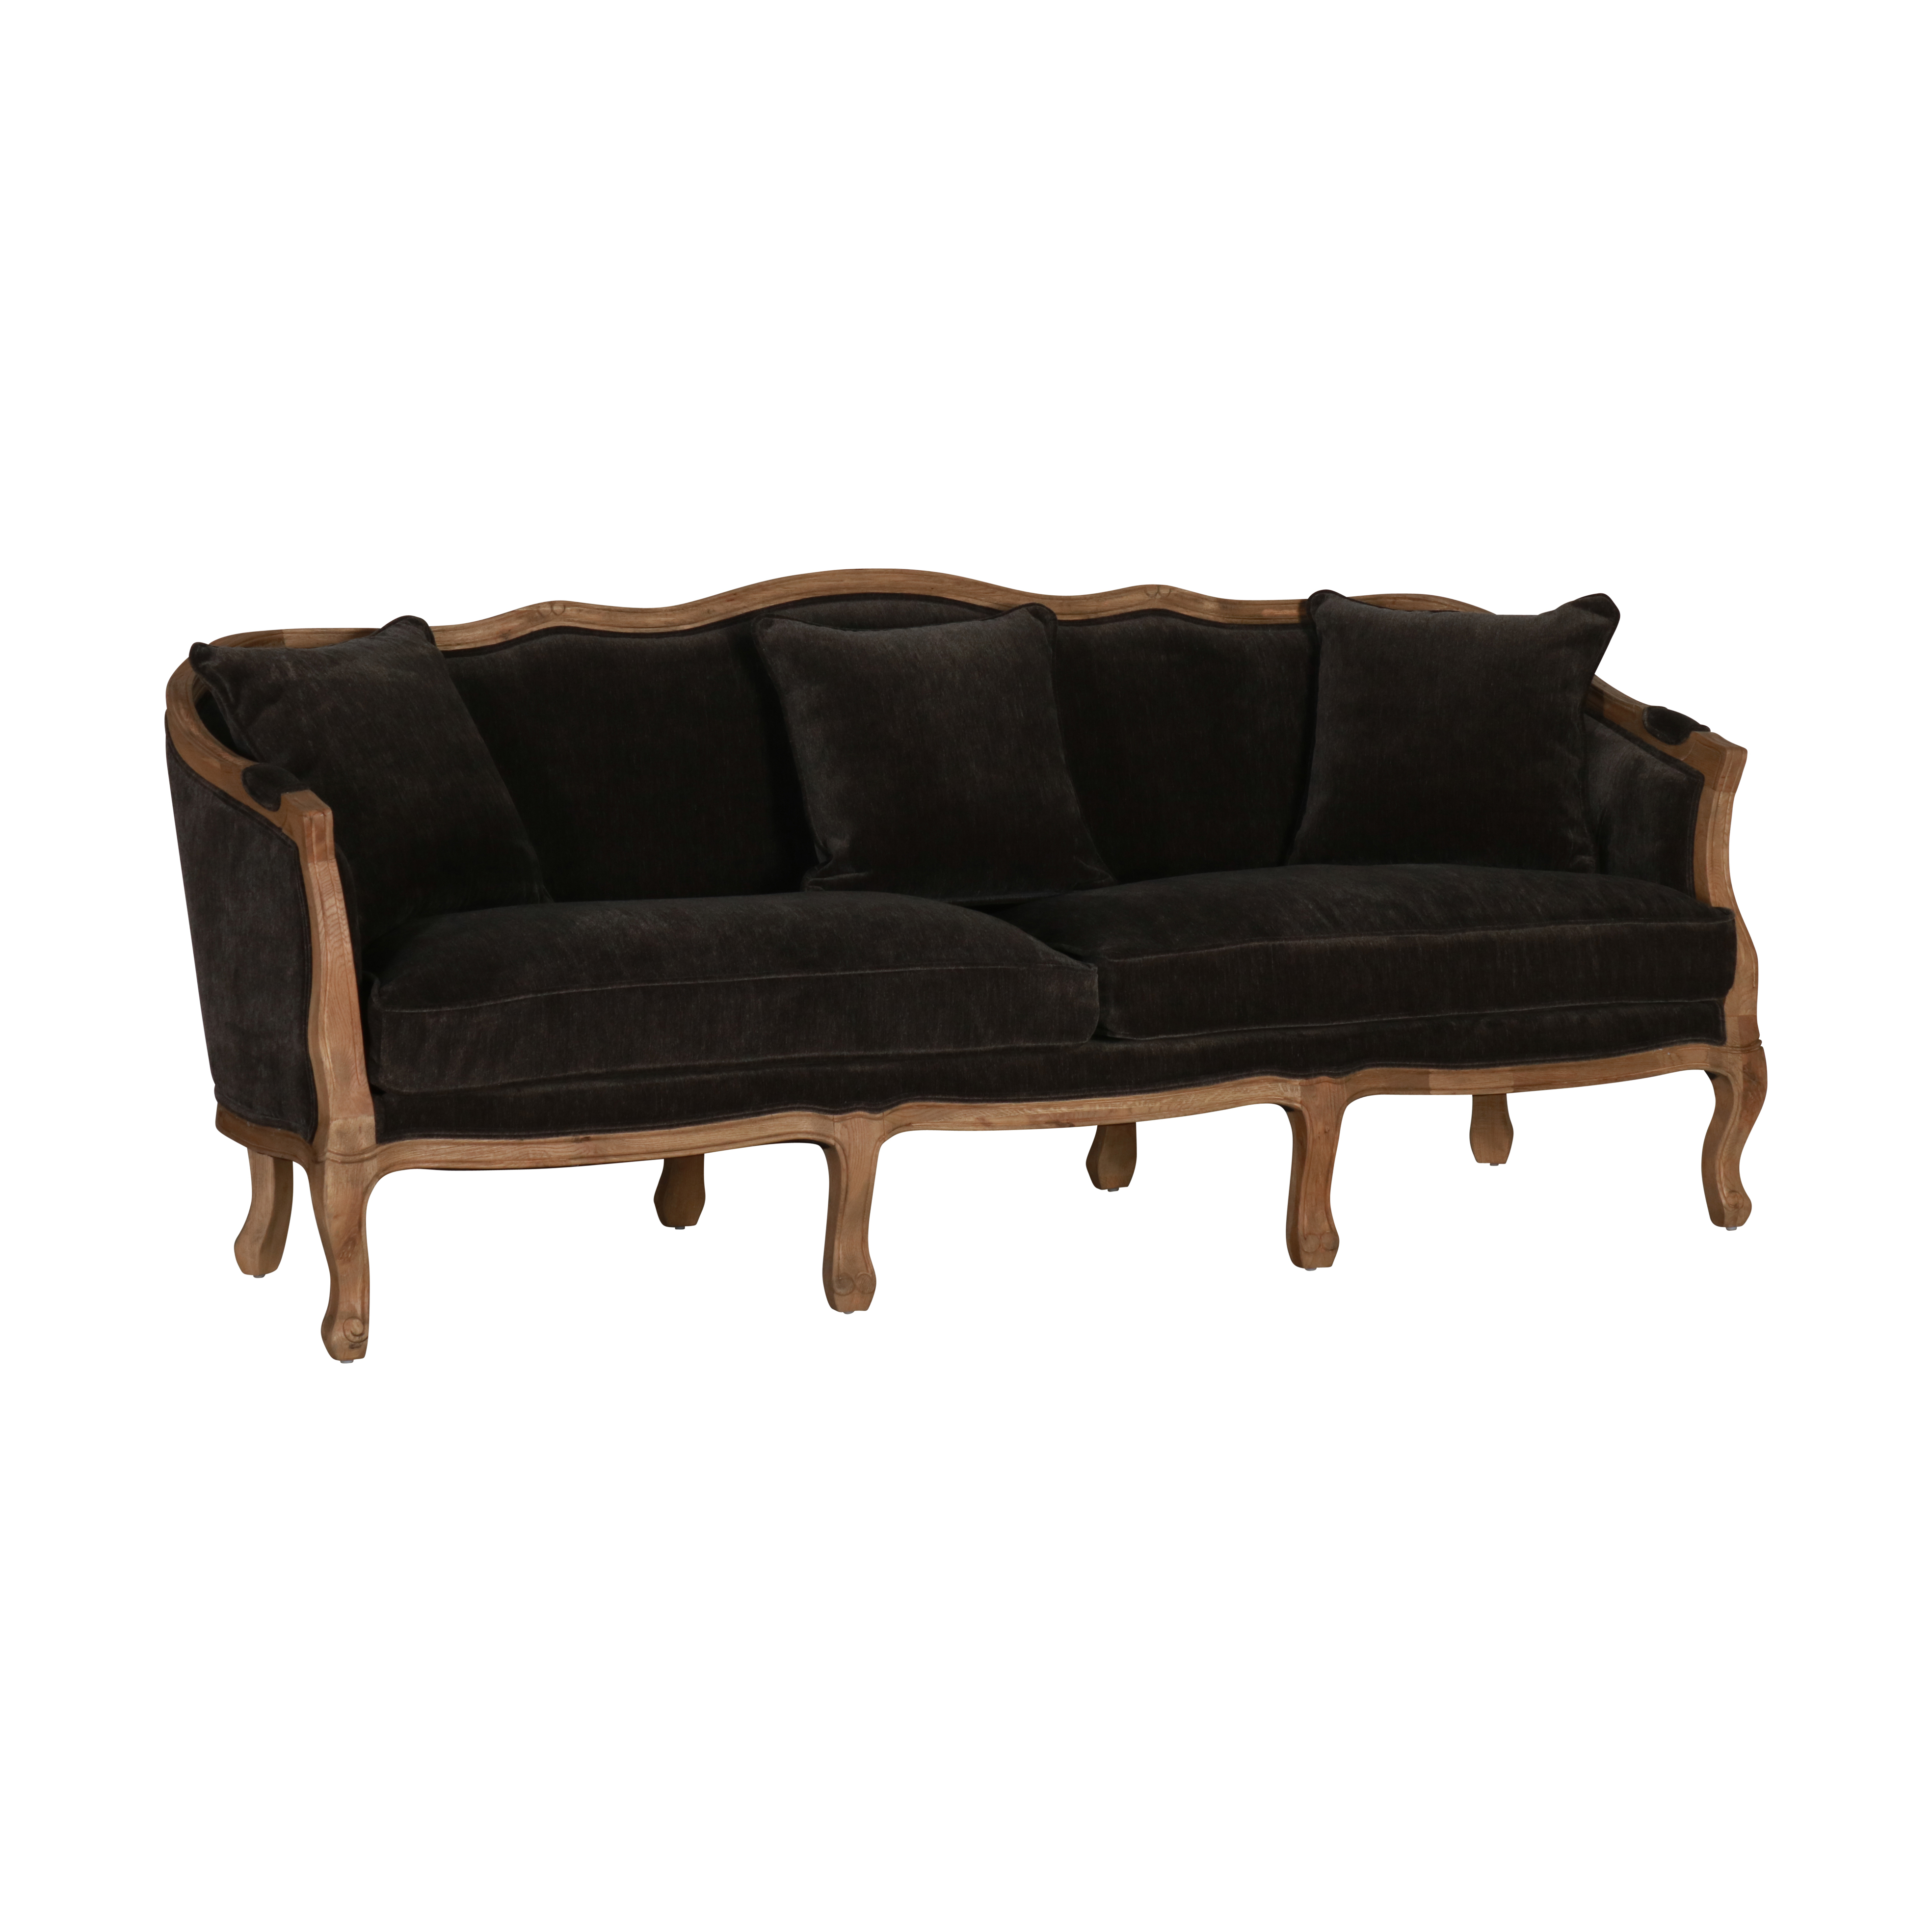 black upholstered French sofa with oak frame Château collection